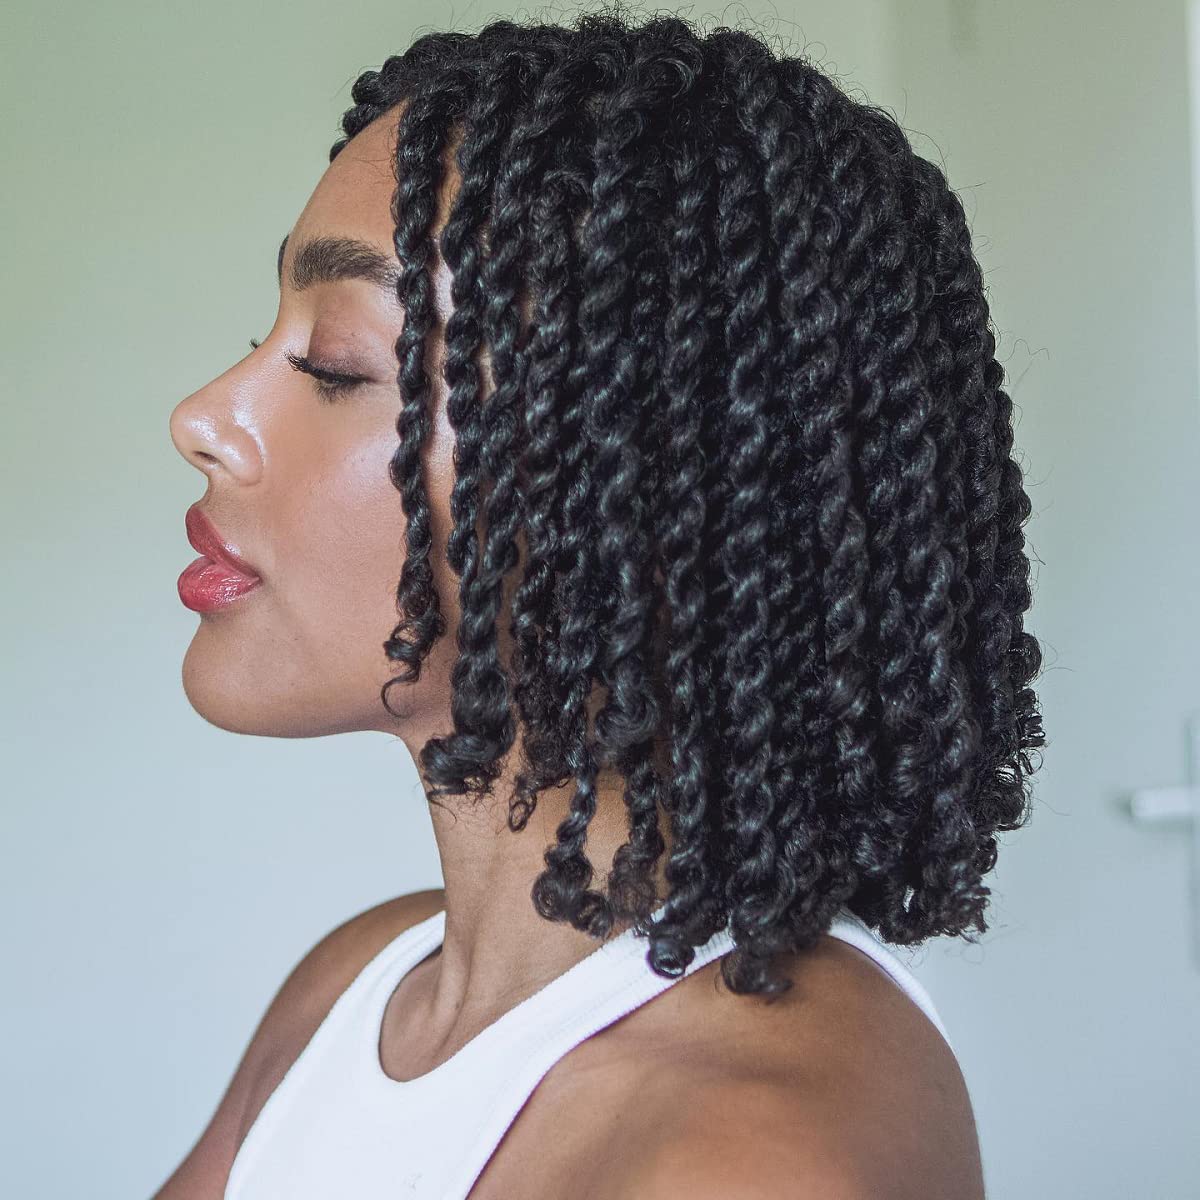 Short Passion Twist Hair Inch Packs Pre Twisted Passion Twists Crochet Hair For Black Women